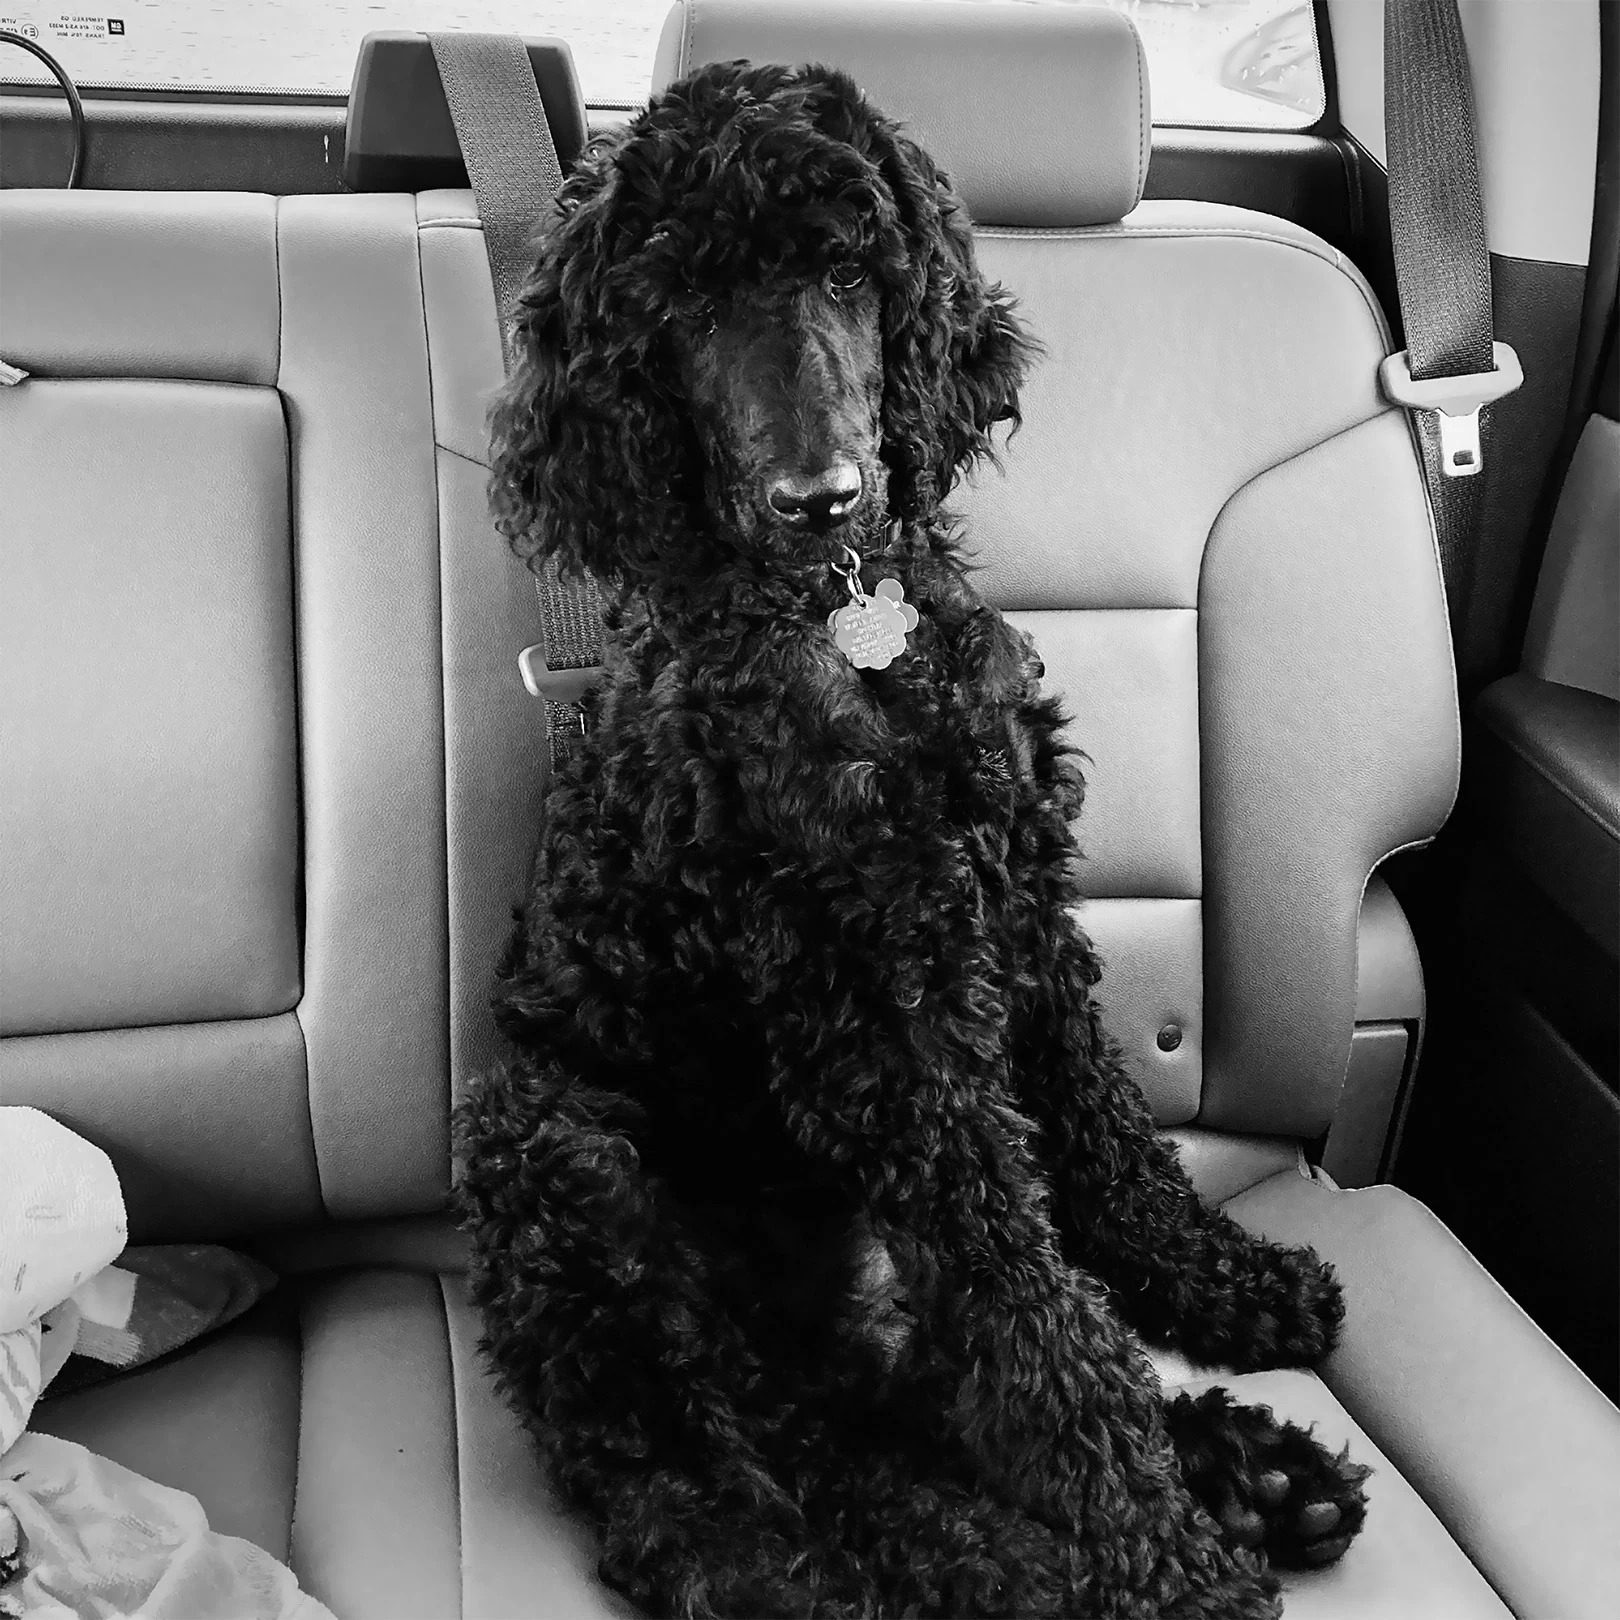 Our poodle riding in the car